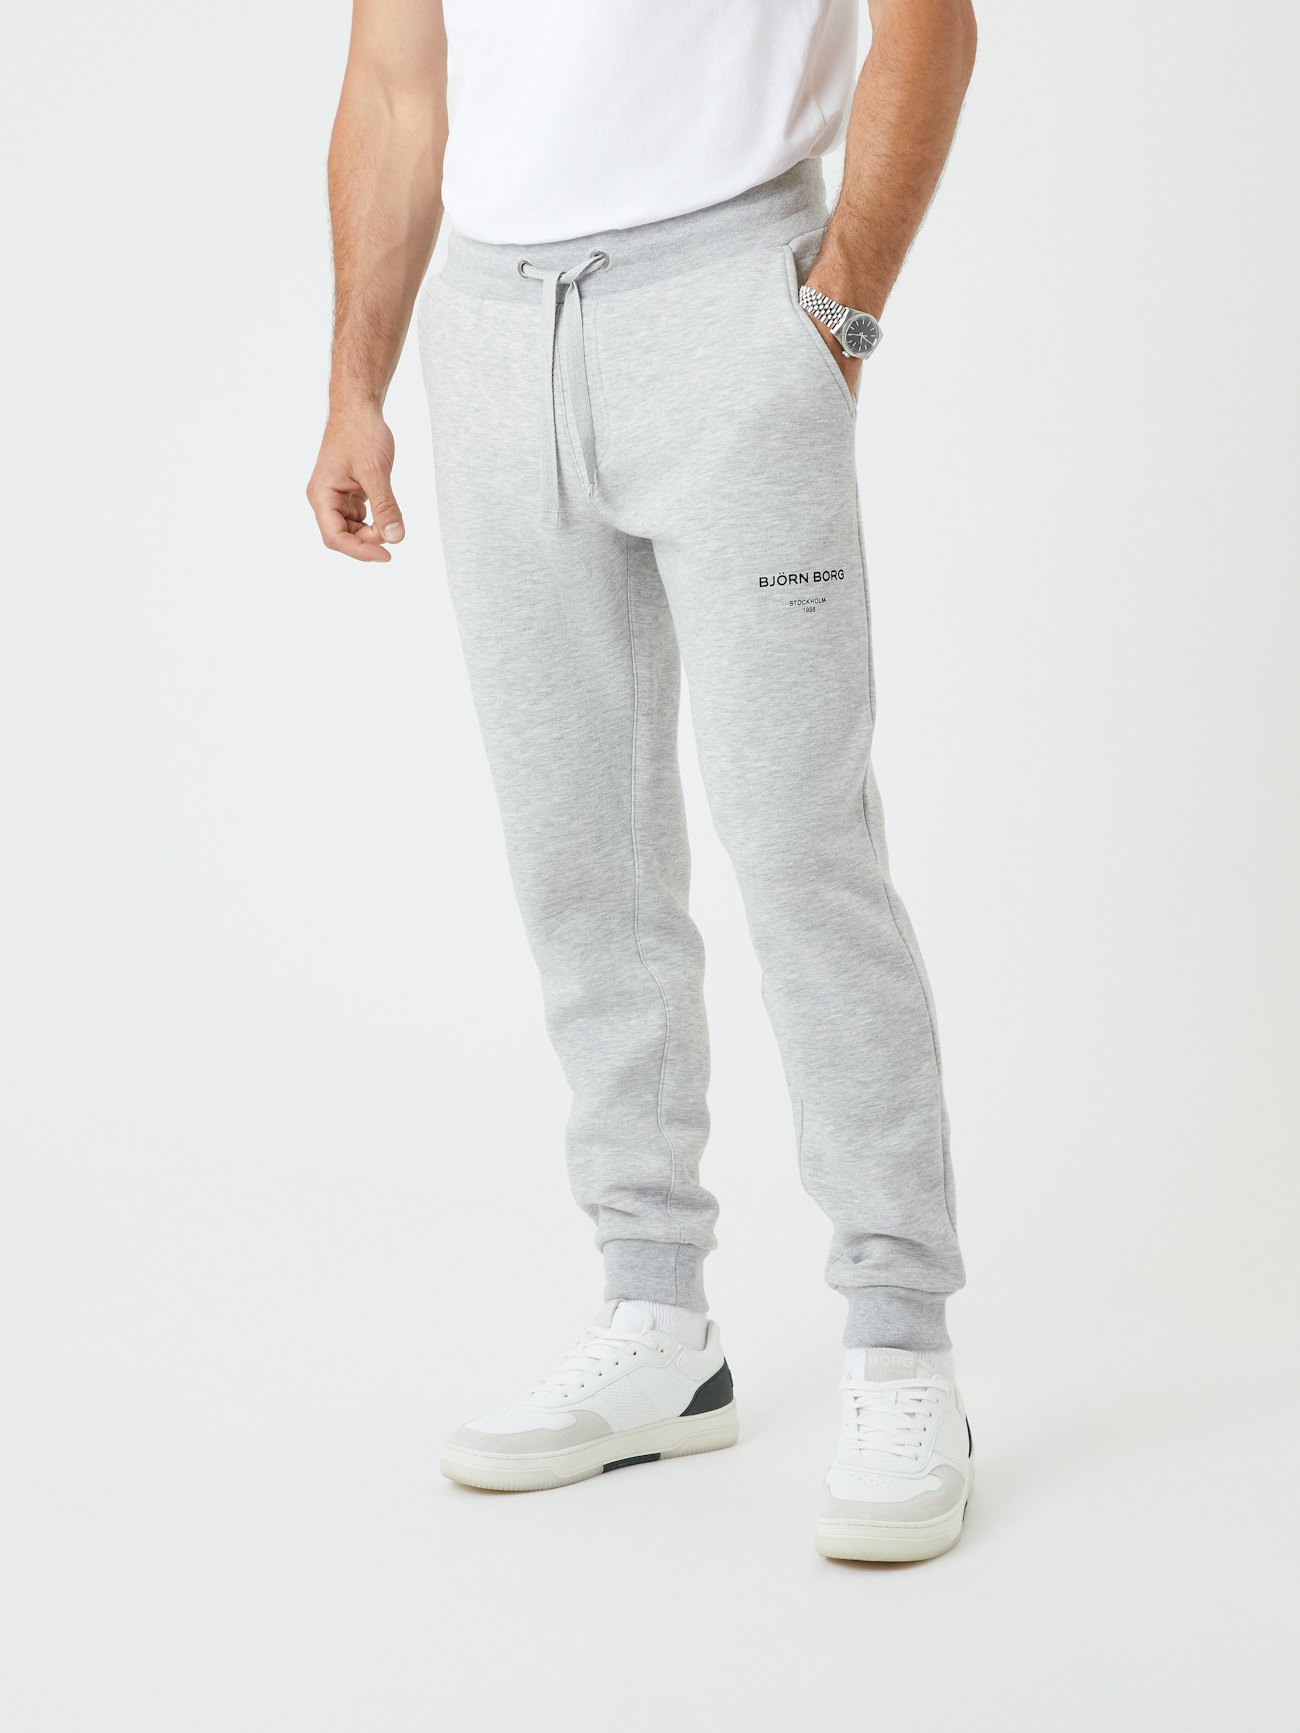 I.FIV5 Stretch Ripstop joggers in Grey for Men